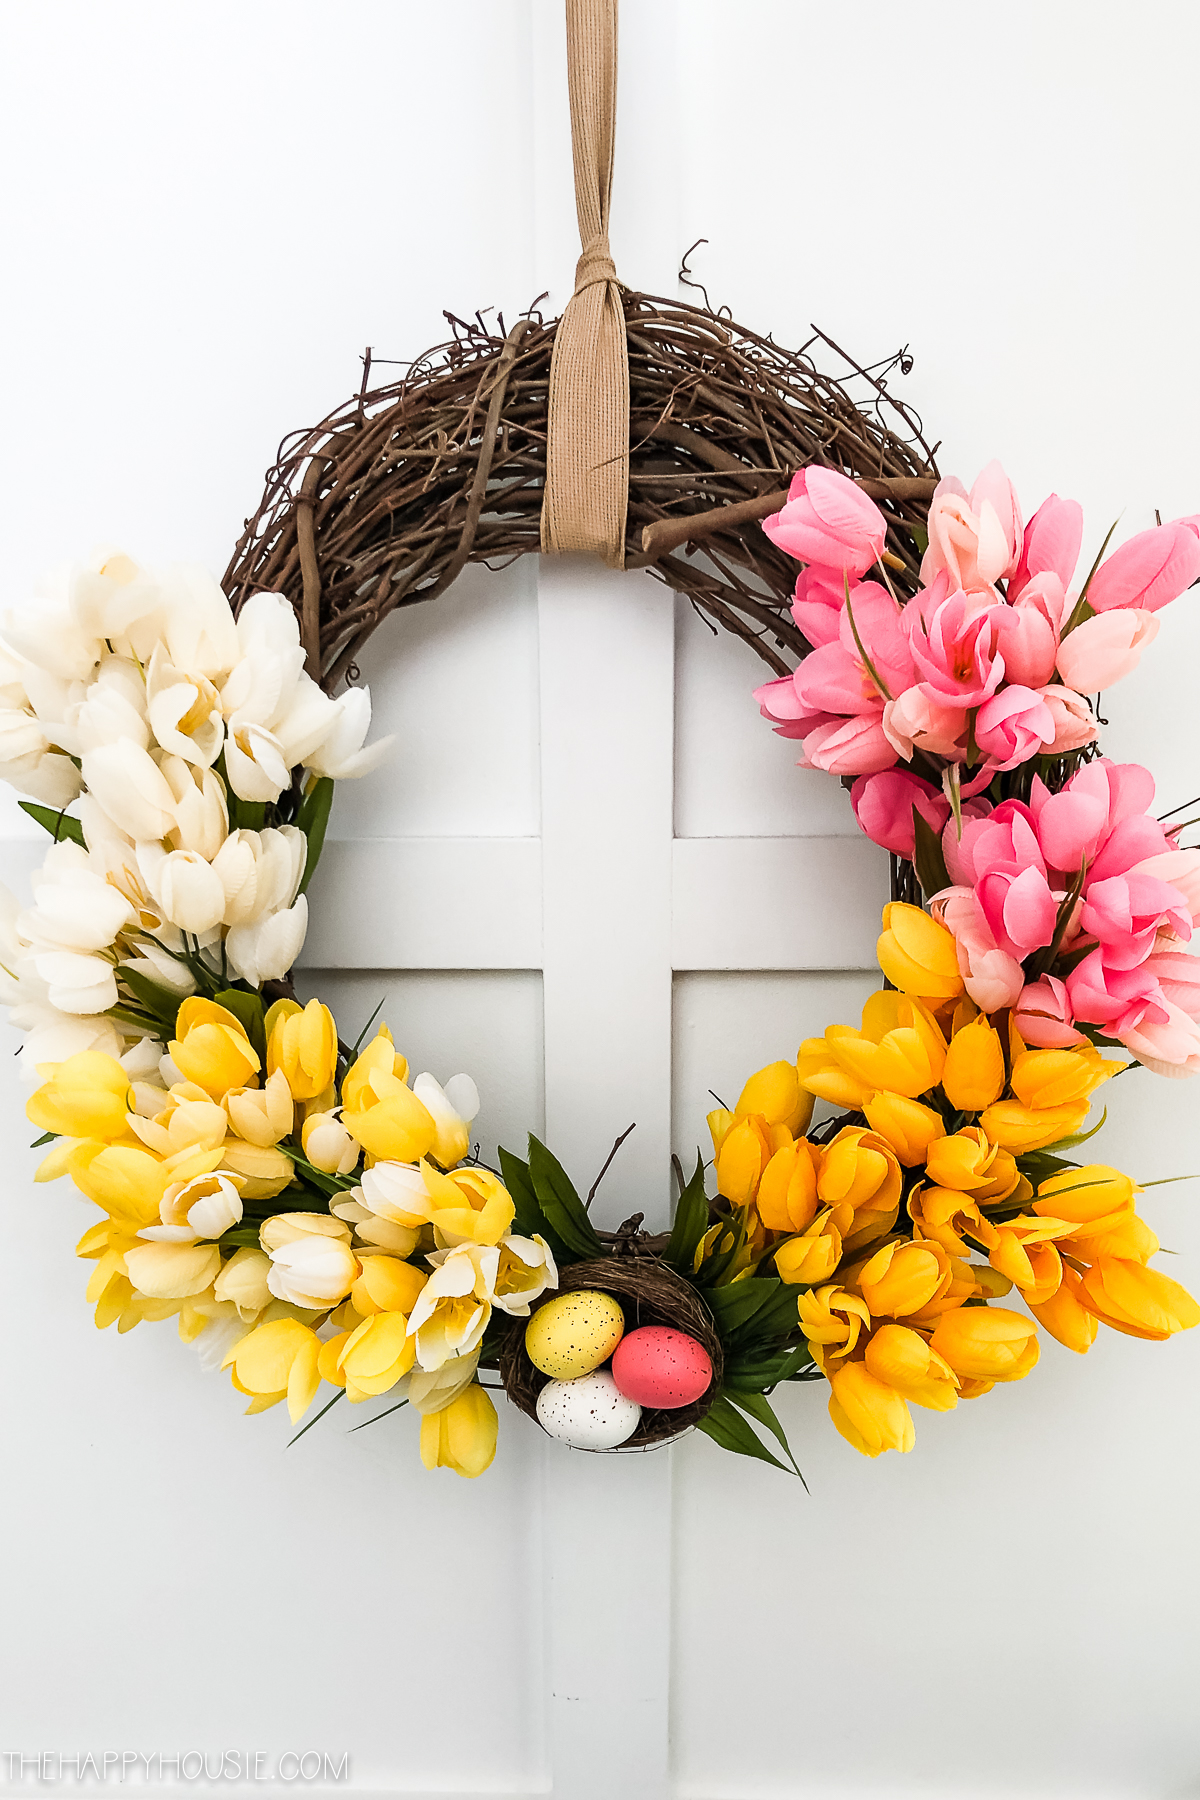 A spring wreath with pink, yellow, and white faux tulips on it.